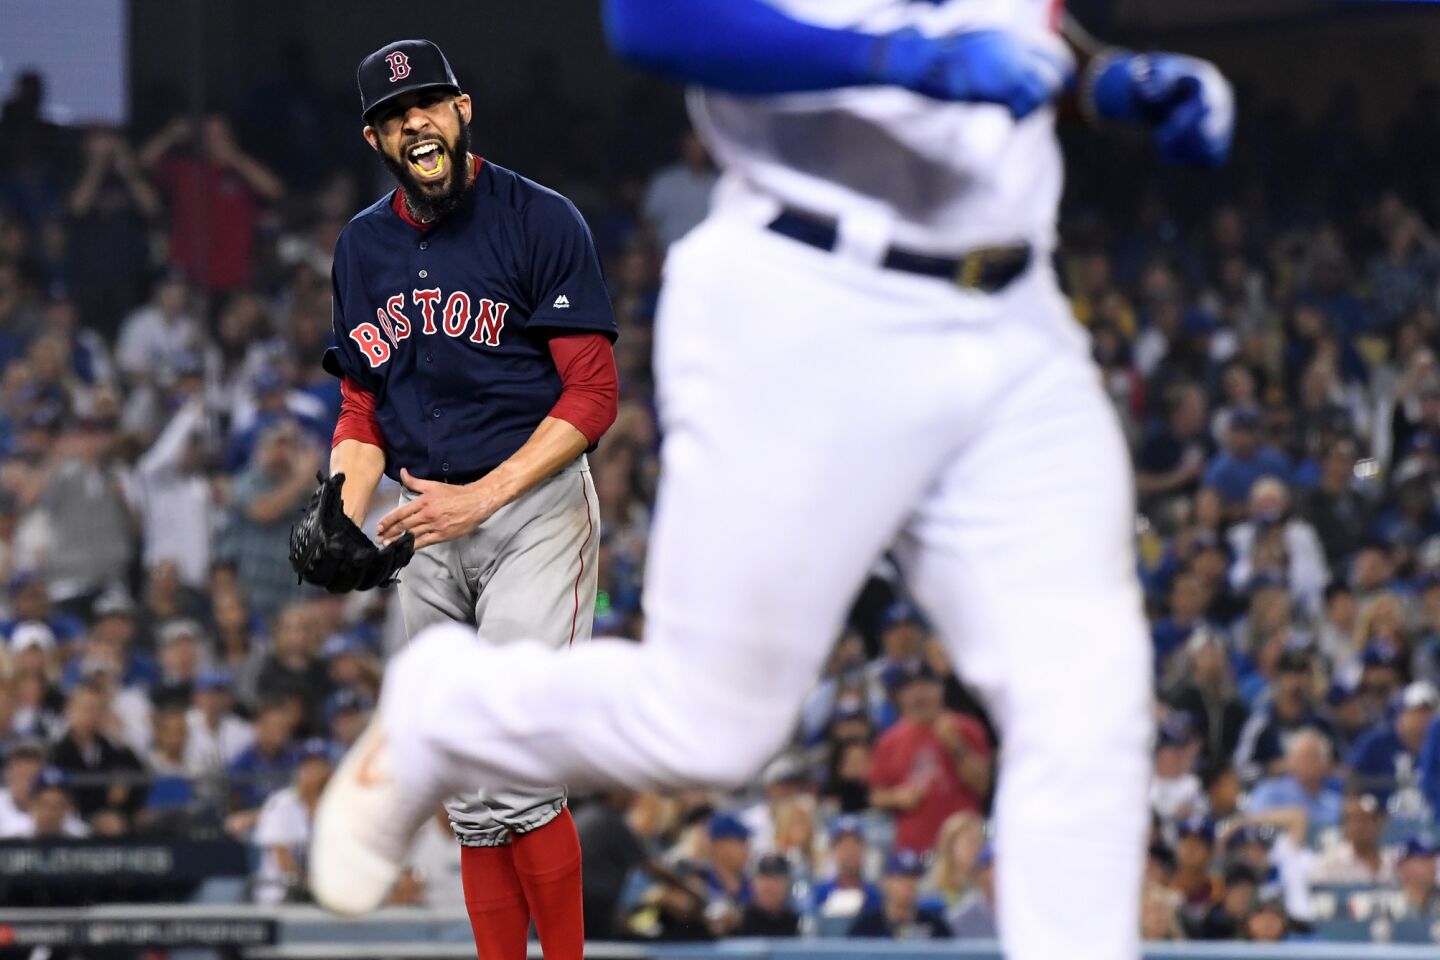 Red Sox starting pitcher David Price reacts after getting Dodgers right fielder Yasiel Puig to ground out in the seventh inning.